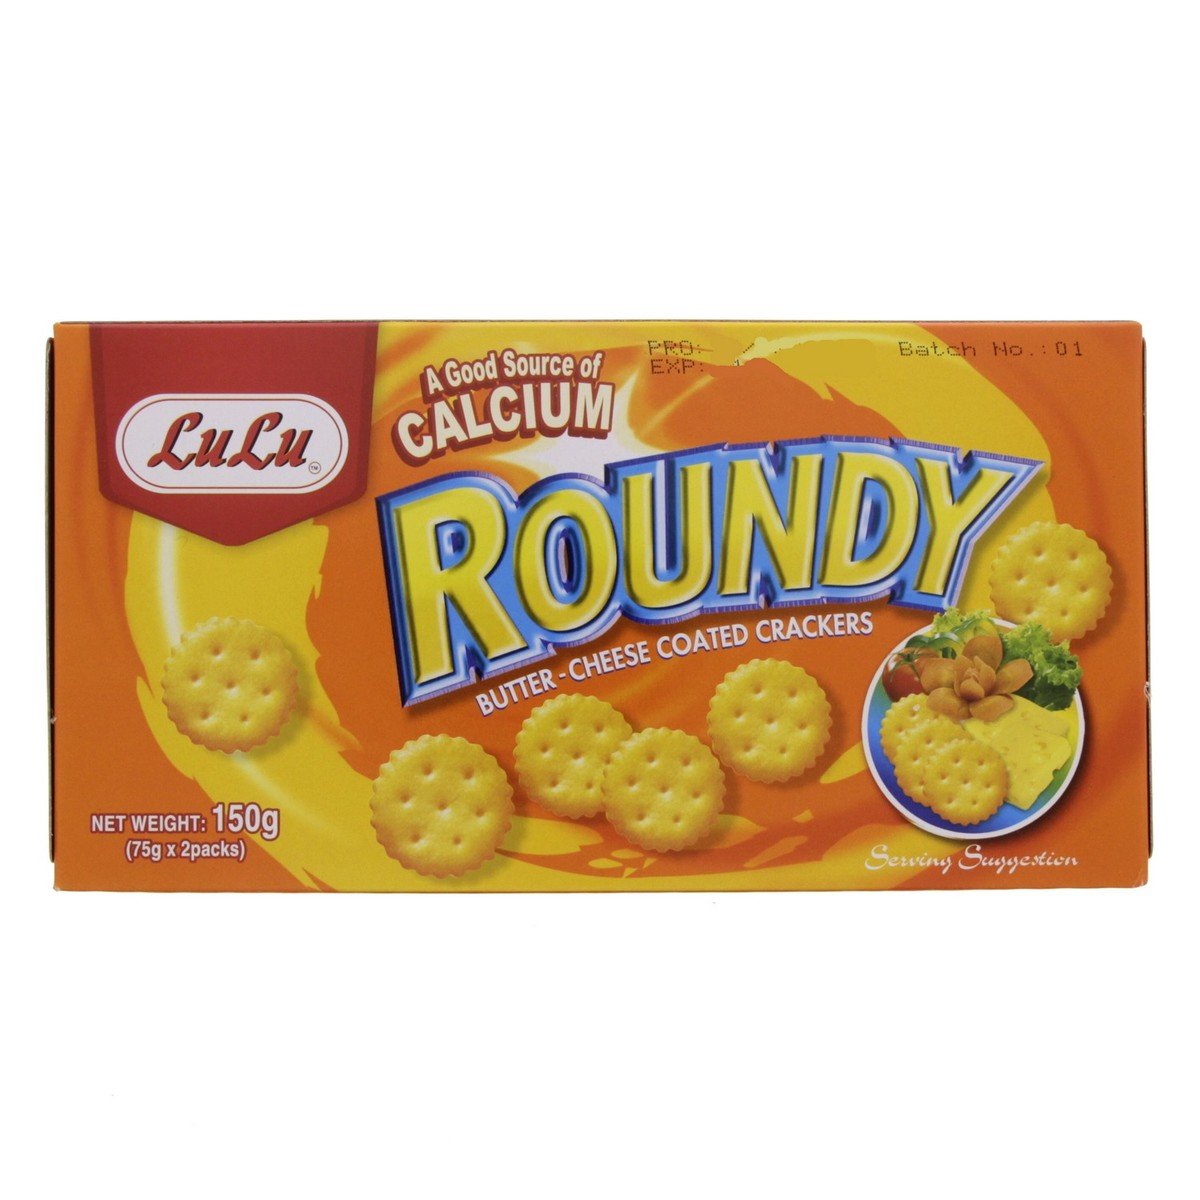 LuLu Roundy Butter Cheese Coated Crackers 150 g